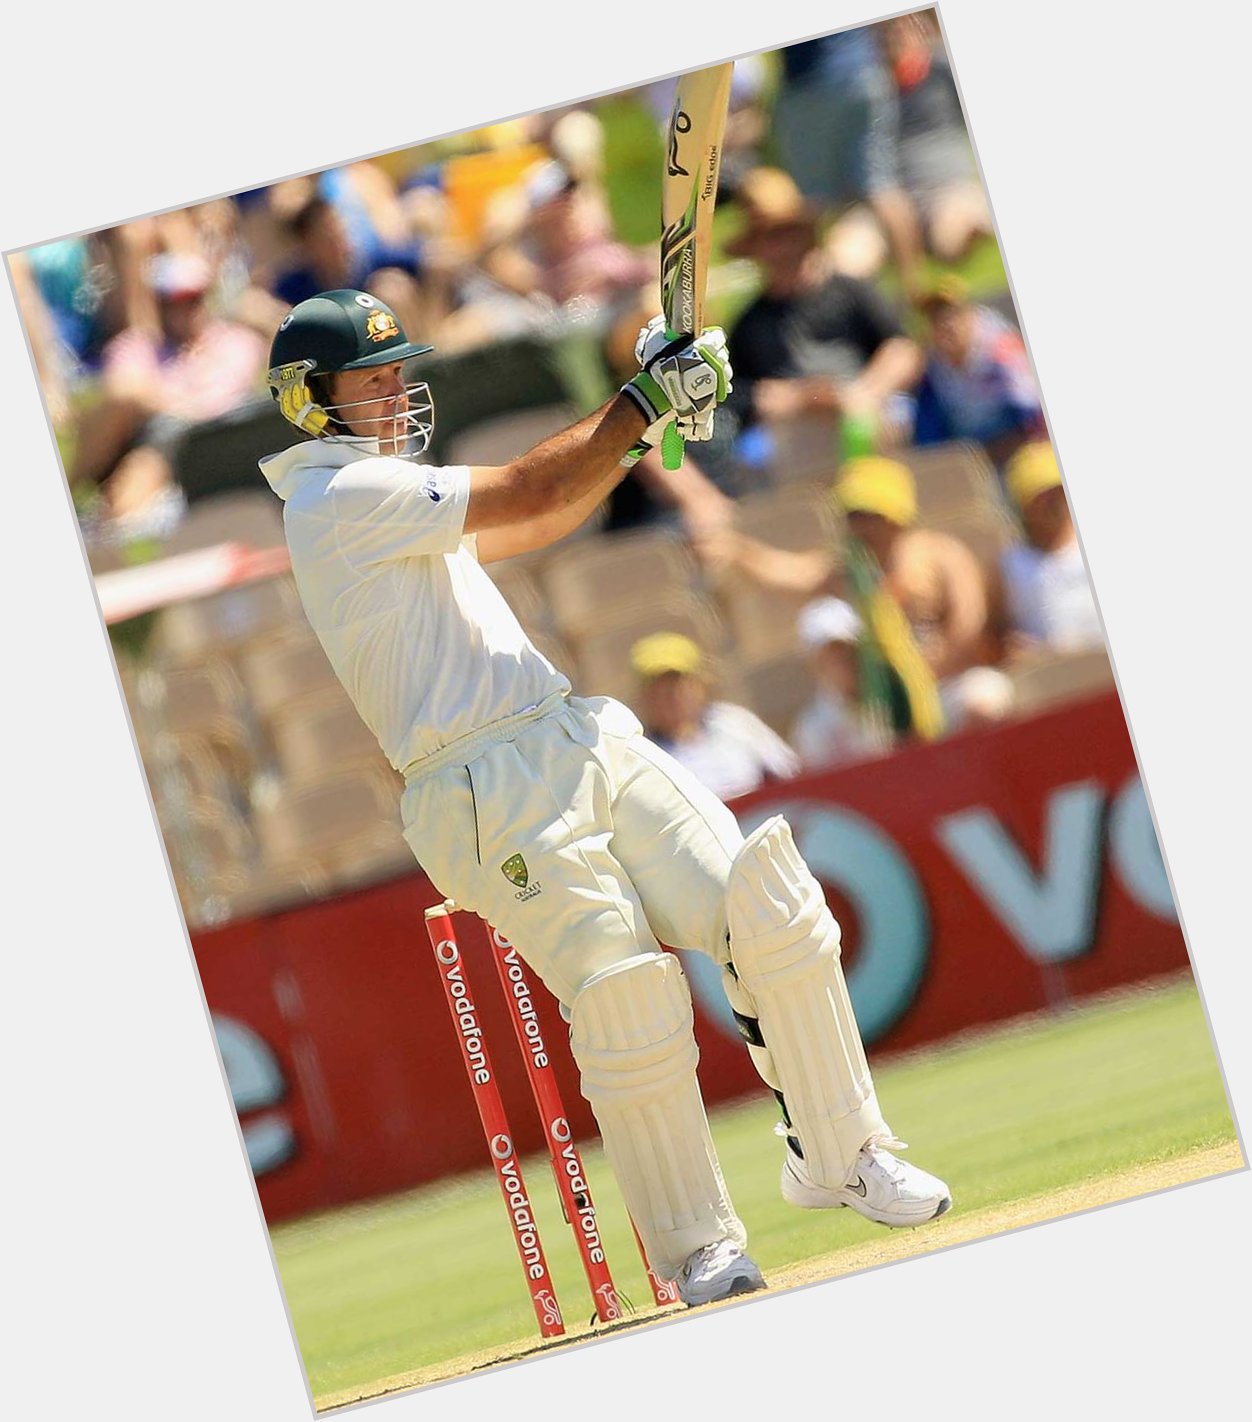 When I grow up I want to pull the ball like Ricky Ponting. Happy Birthday 